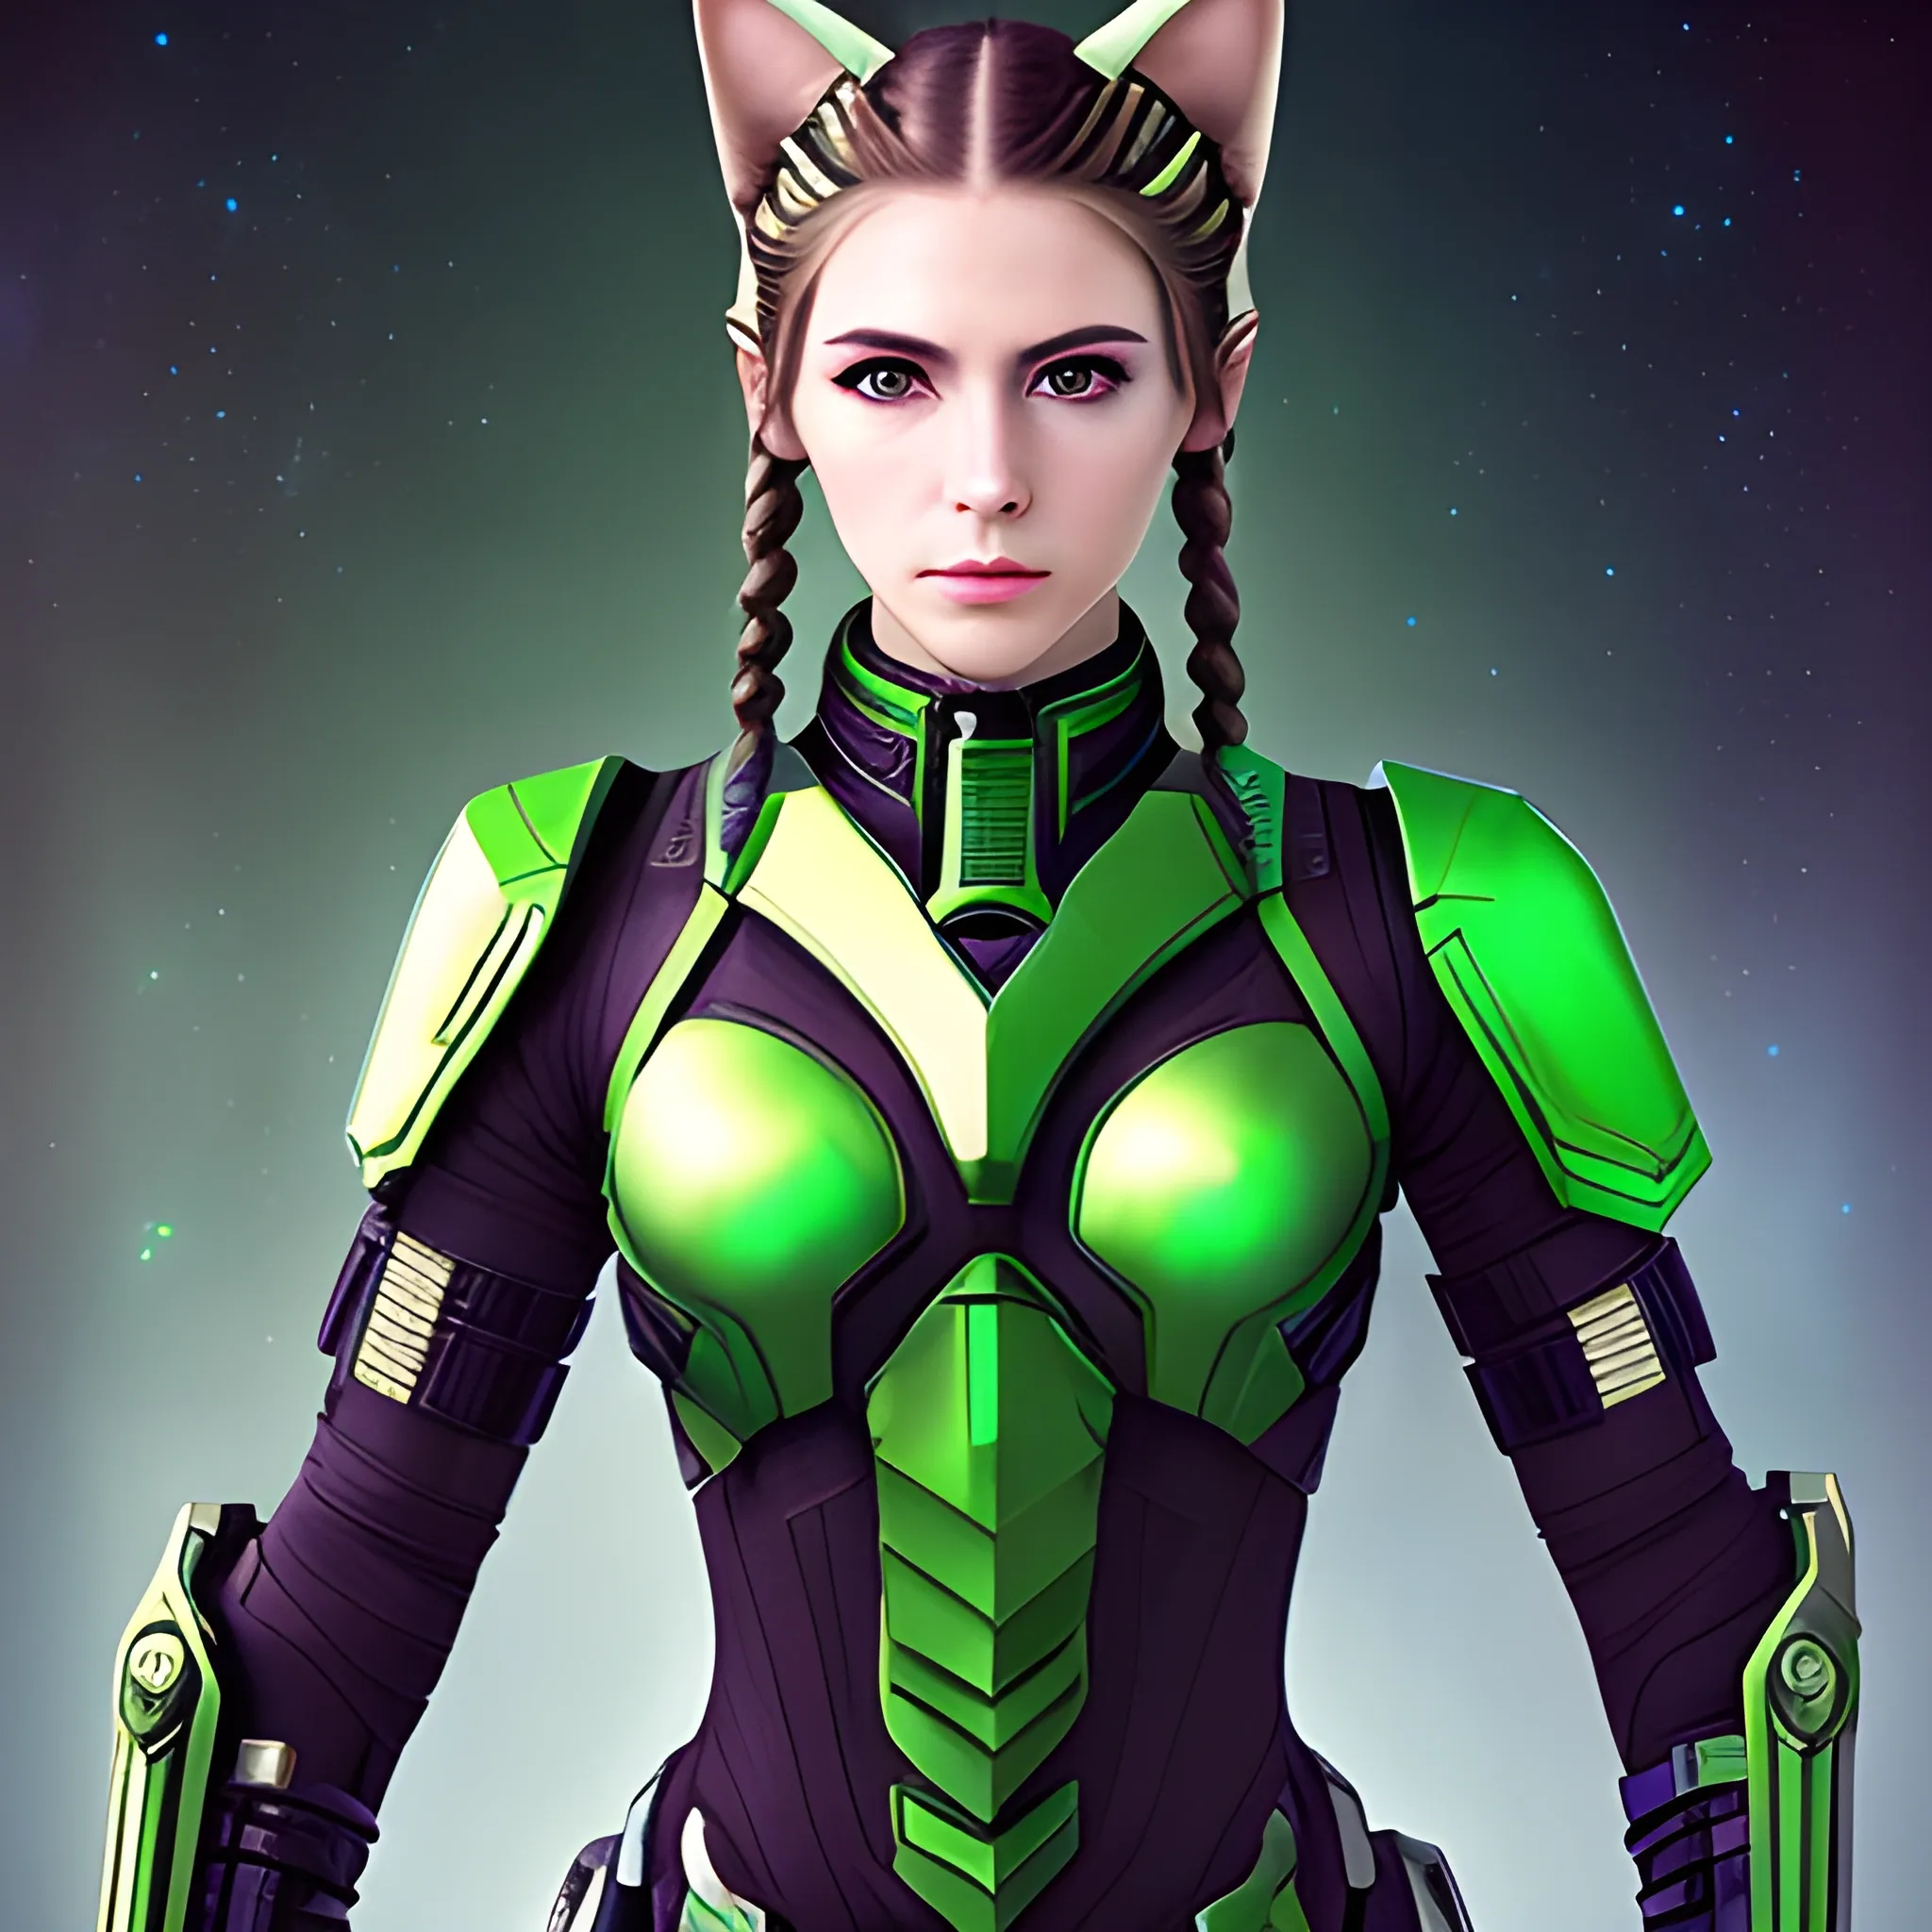 Sci-Fi, (masterpiece), (full-body portrait), (portrait photography), (portrait of a feminine male), portrait of feminine male with cat ears, feminine face, soft features, full lips, cute feminine face, long hairstyle, braided hairstyle, green eyes, armor from Dead Space 1